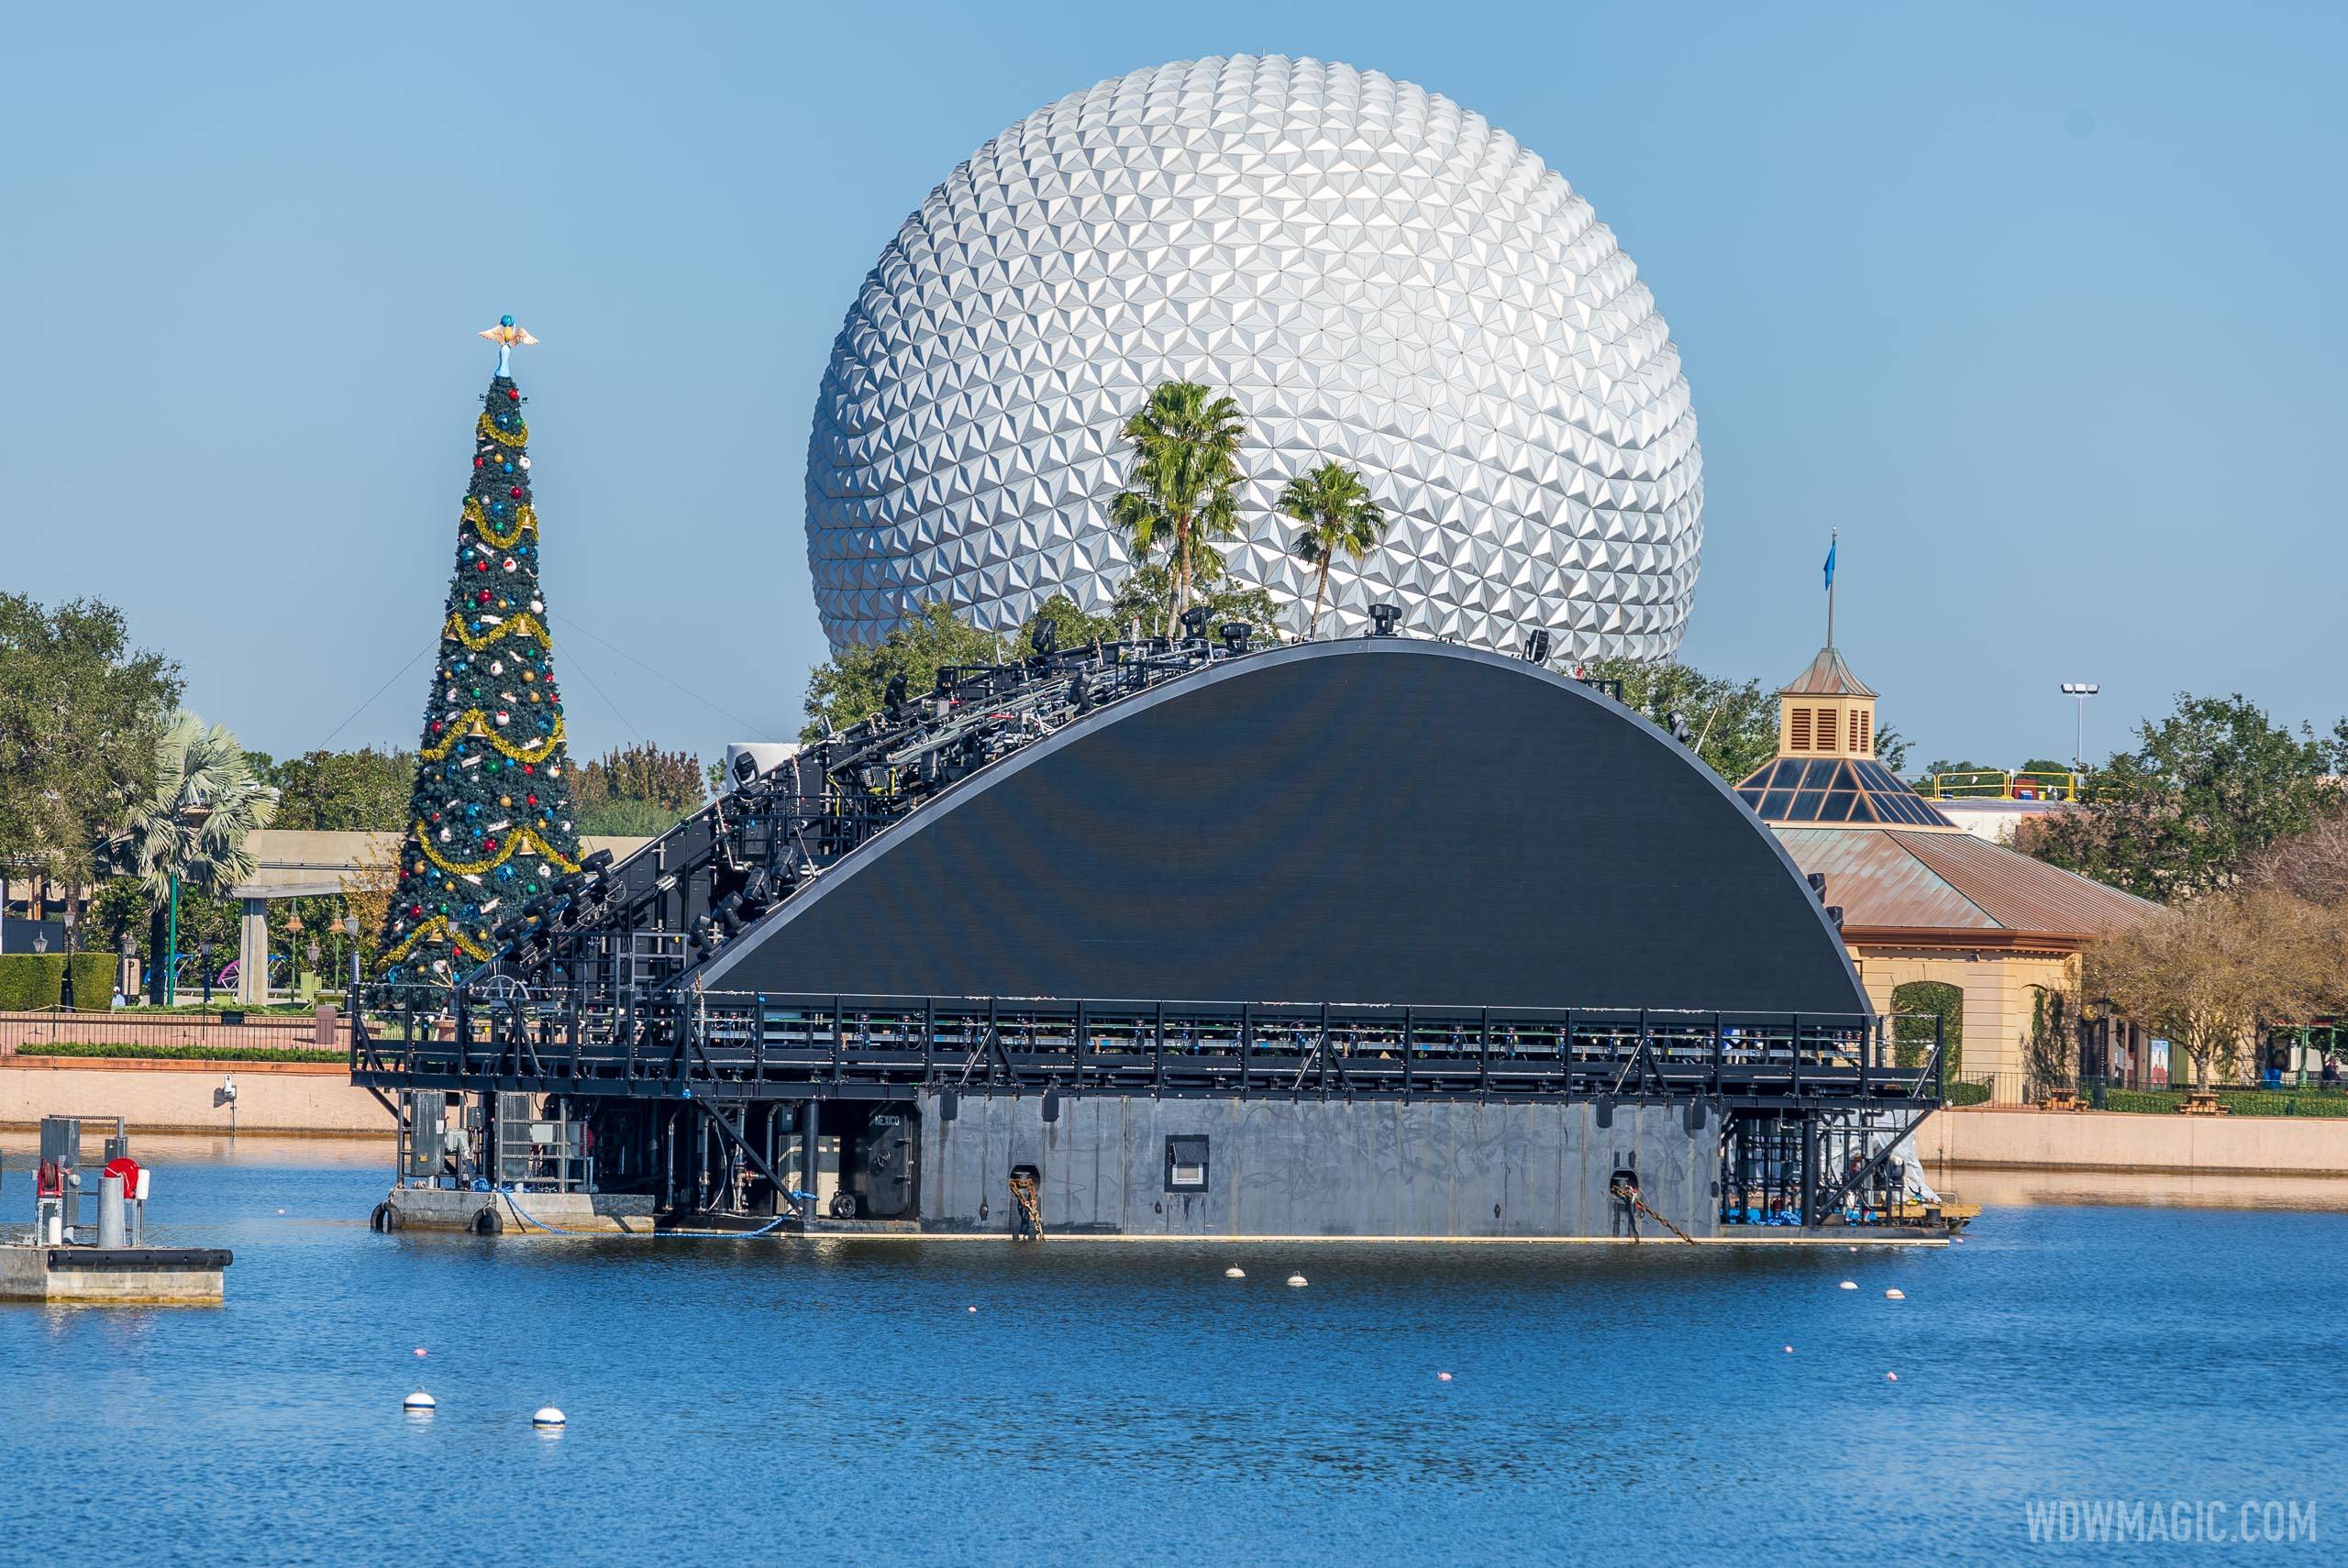 PHOTOS - First Harmonious show barge arrives in World Showcase Lagoon at EPCOT